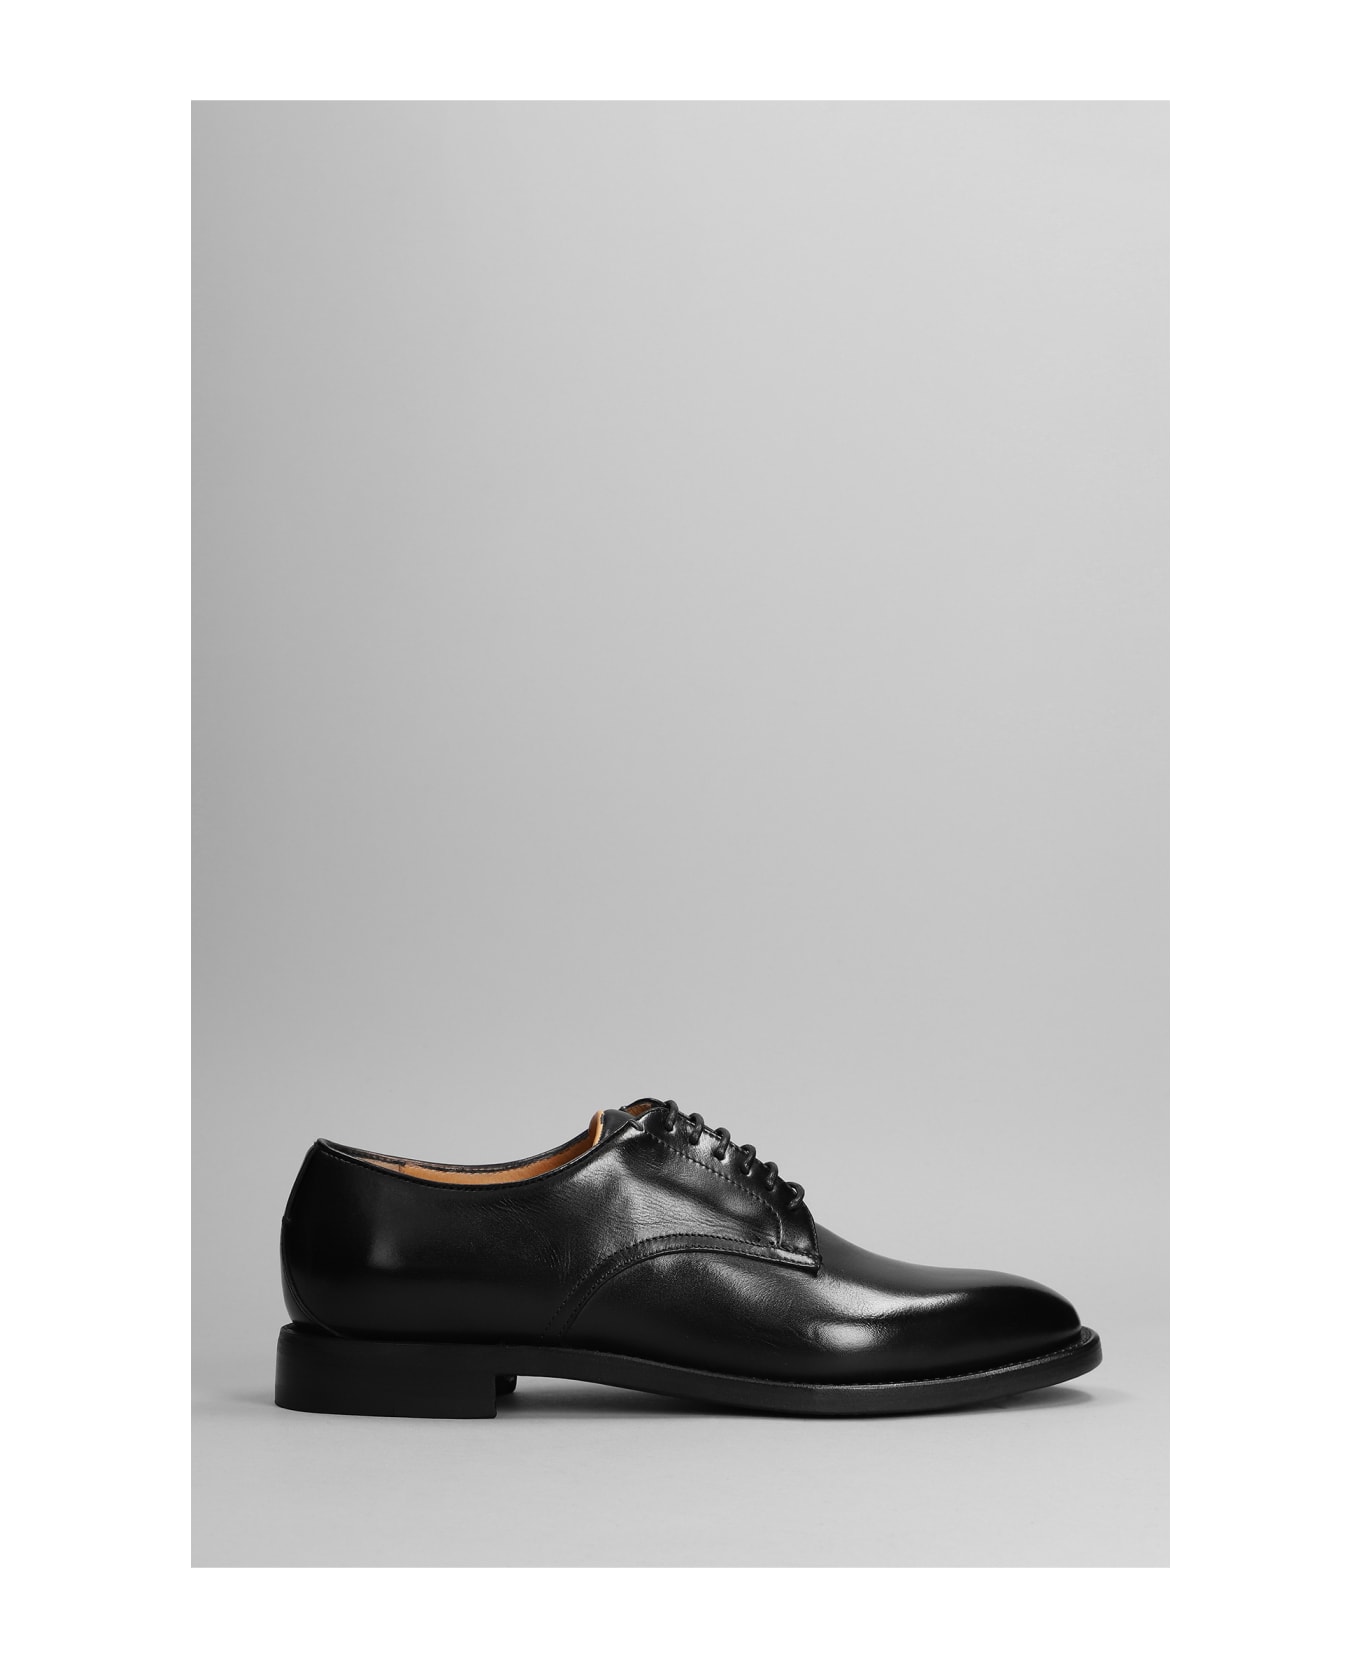 Silvano Sassetti Lace Up Shoes In Black Leather - black